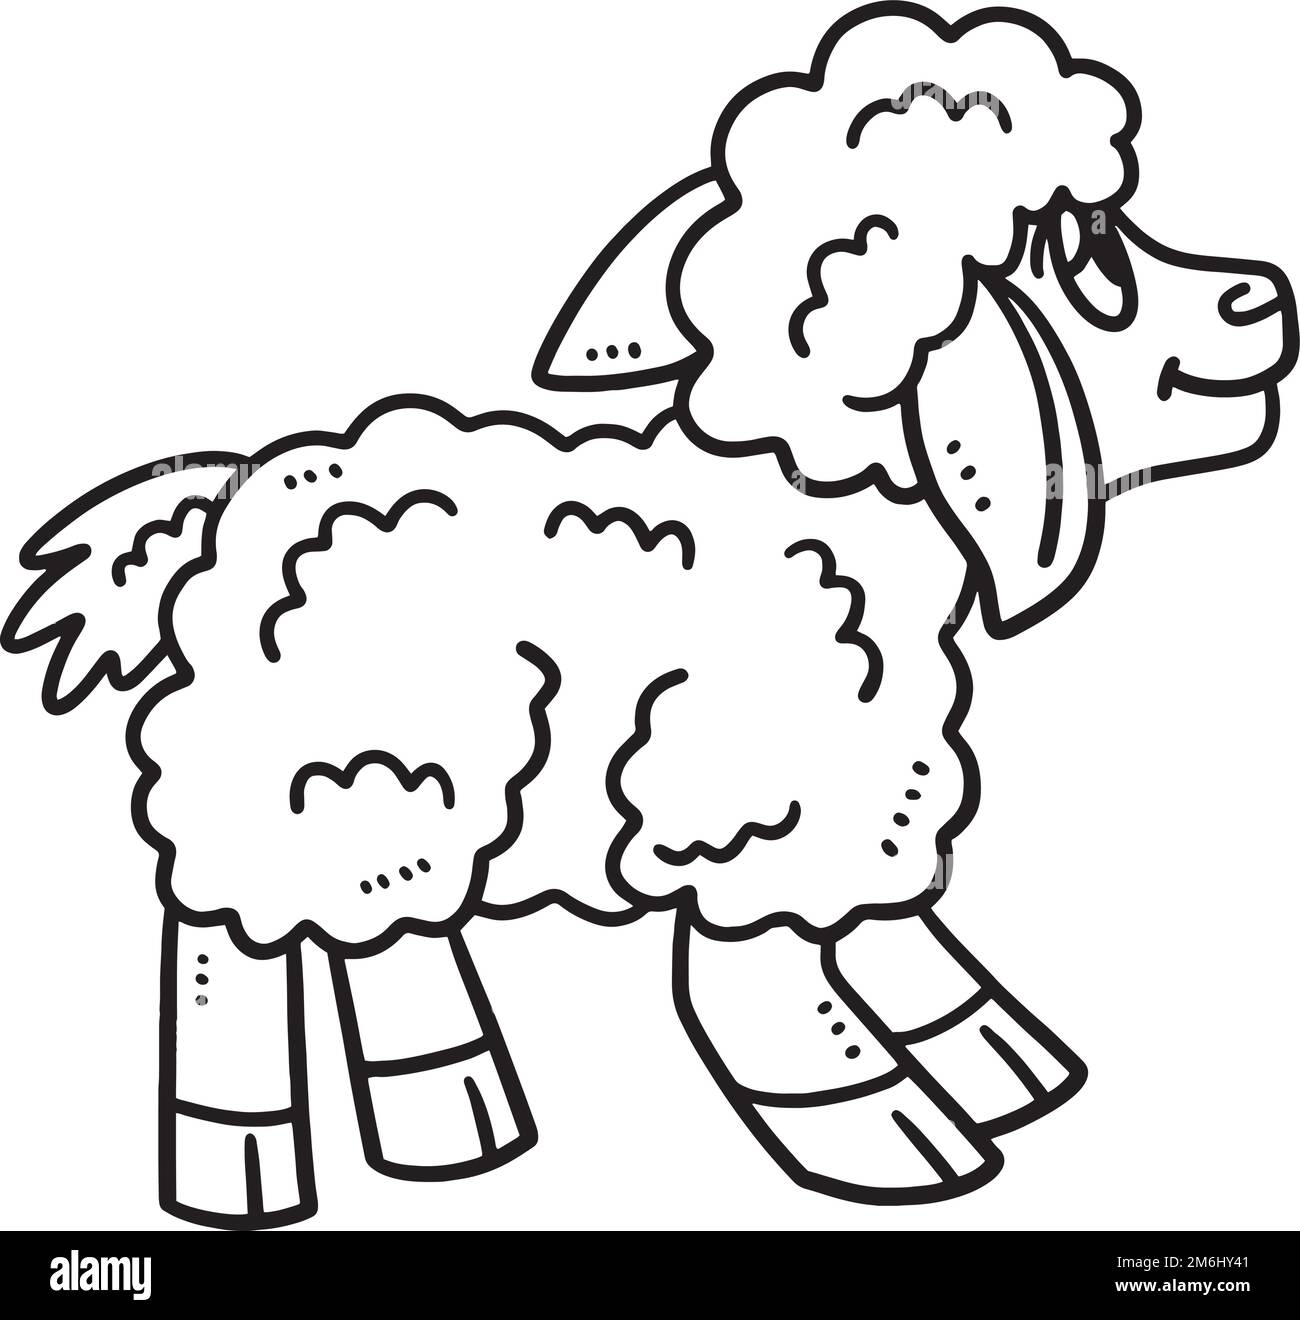 Lamb Isolated Coloring Page for Kids Stock Vector